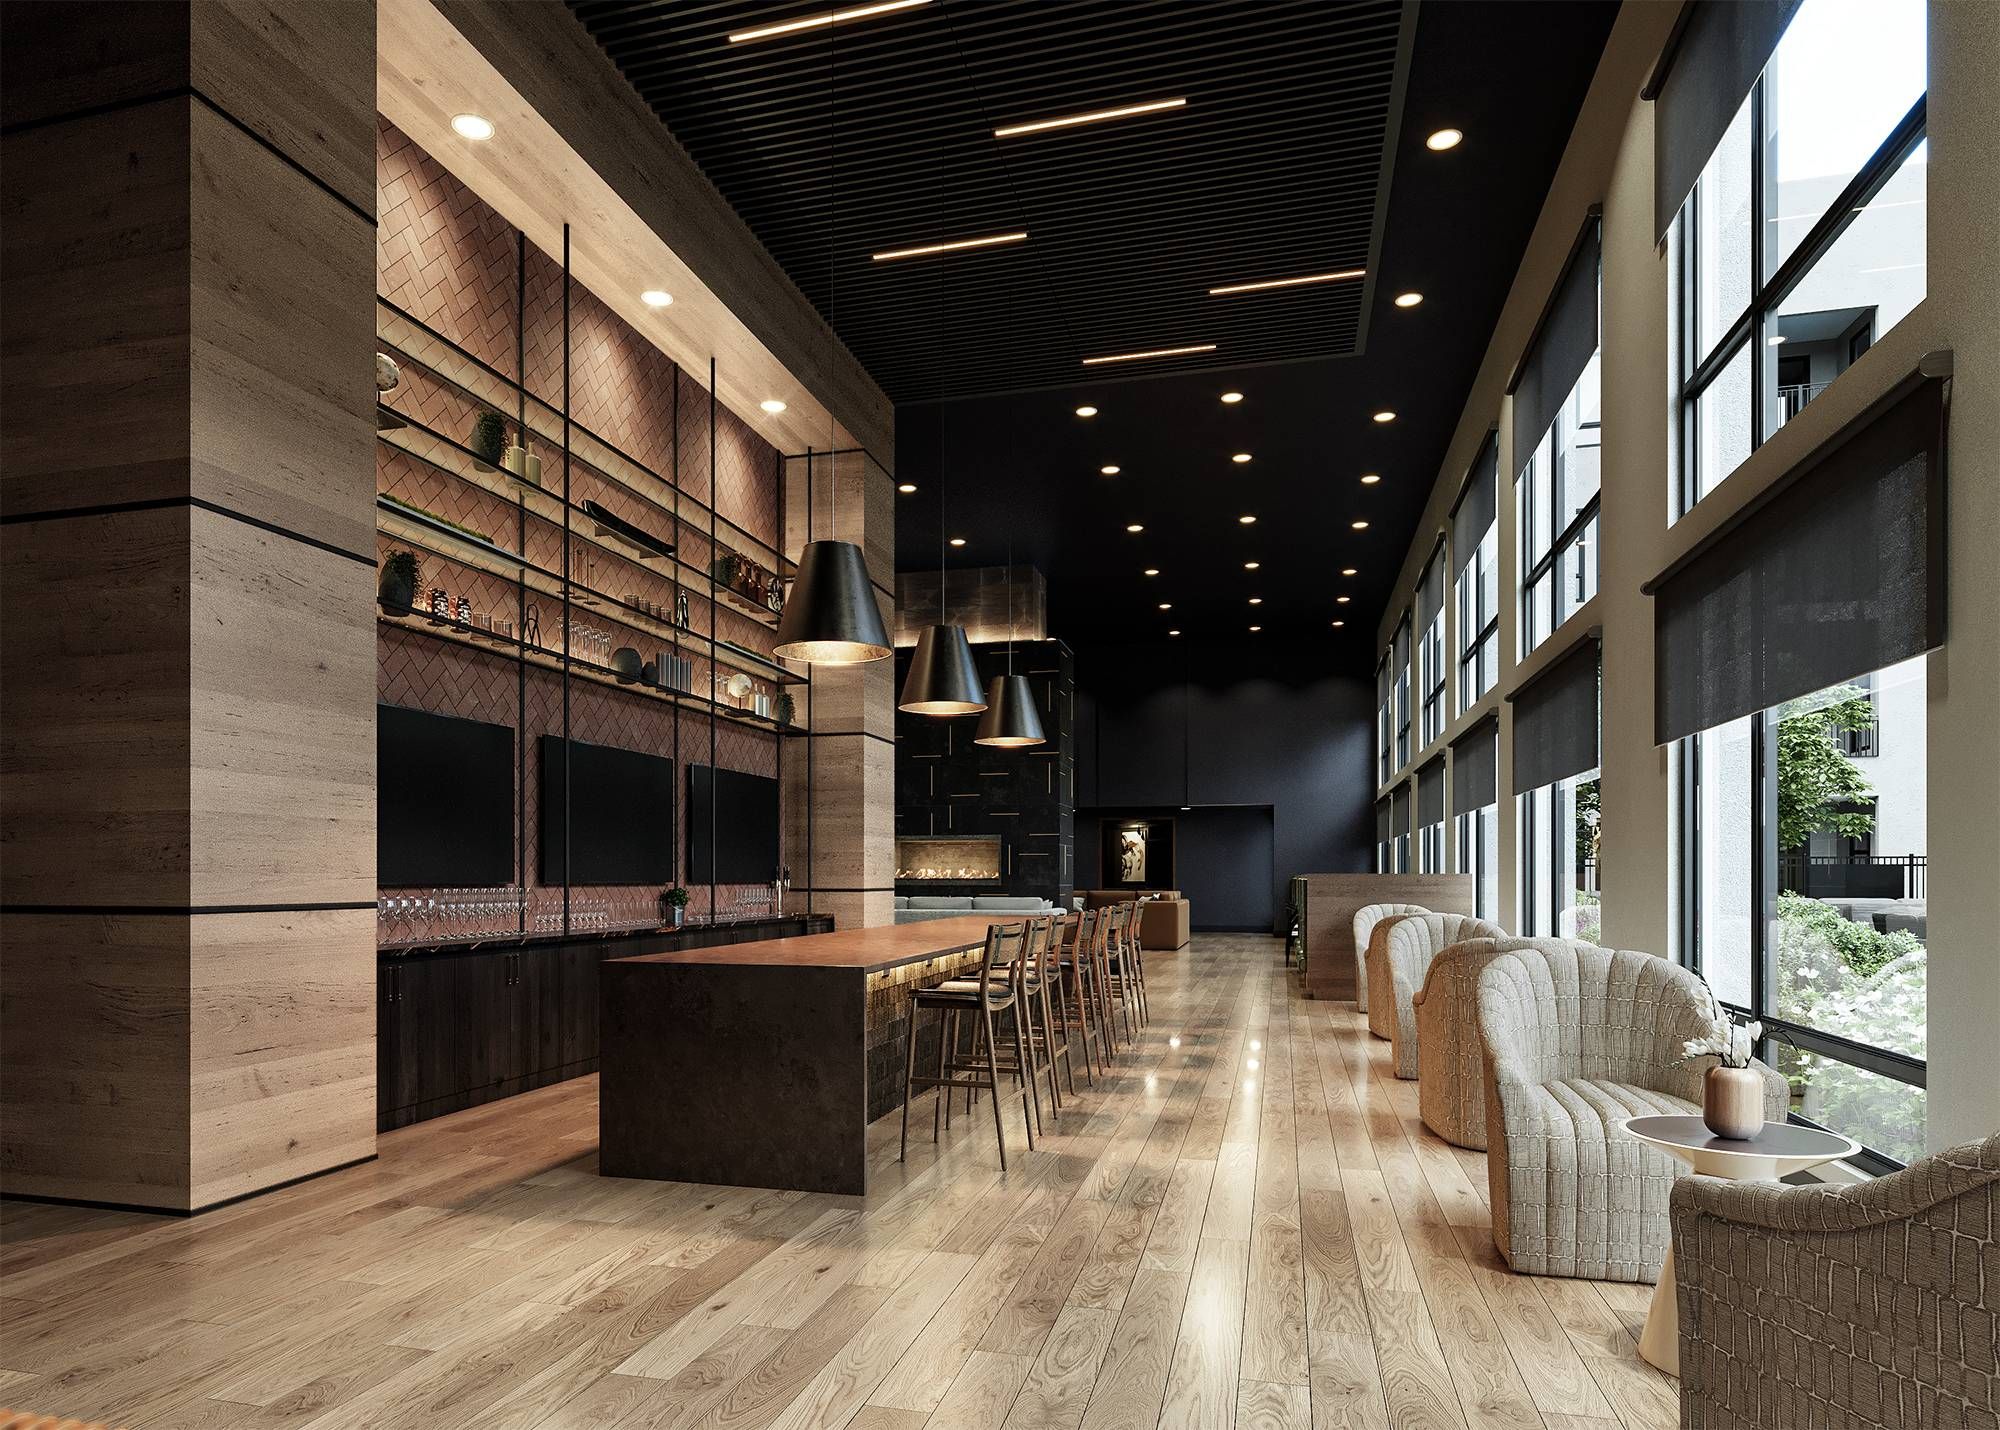 Solana Central Park rendering of bar and event space with high ceilings and beautiful finishes